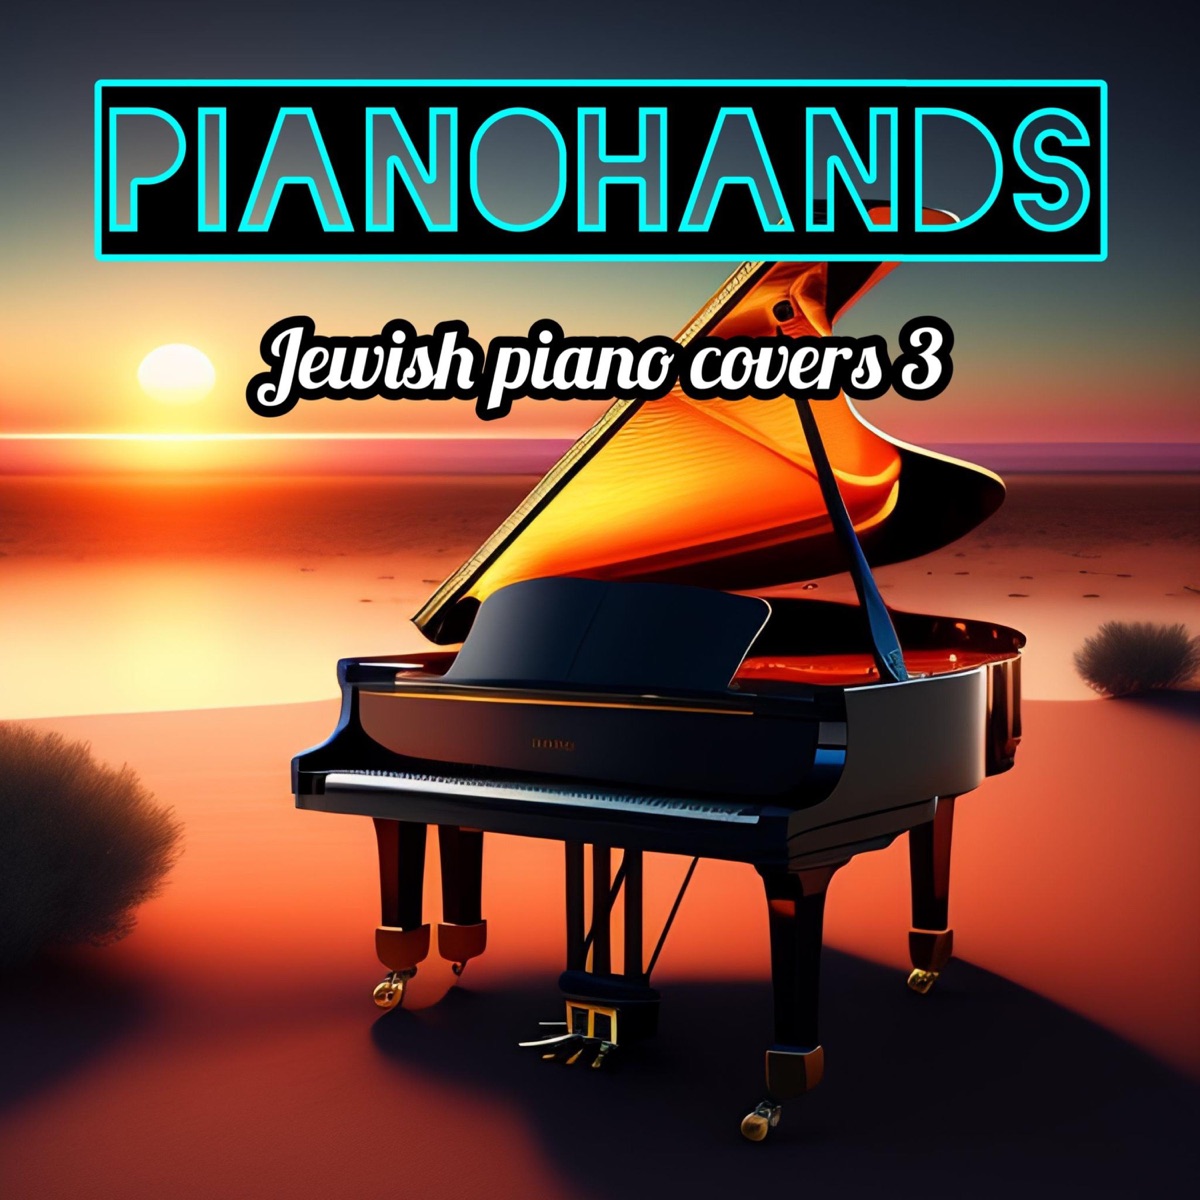 Jewish Piano Covers 3 - Album by Pianohands - Apple Music